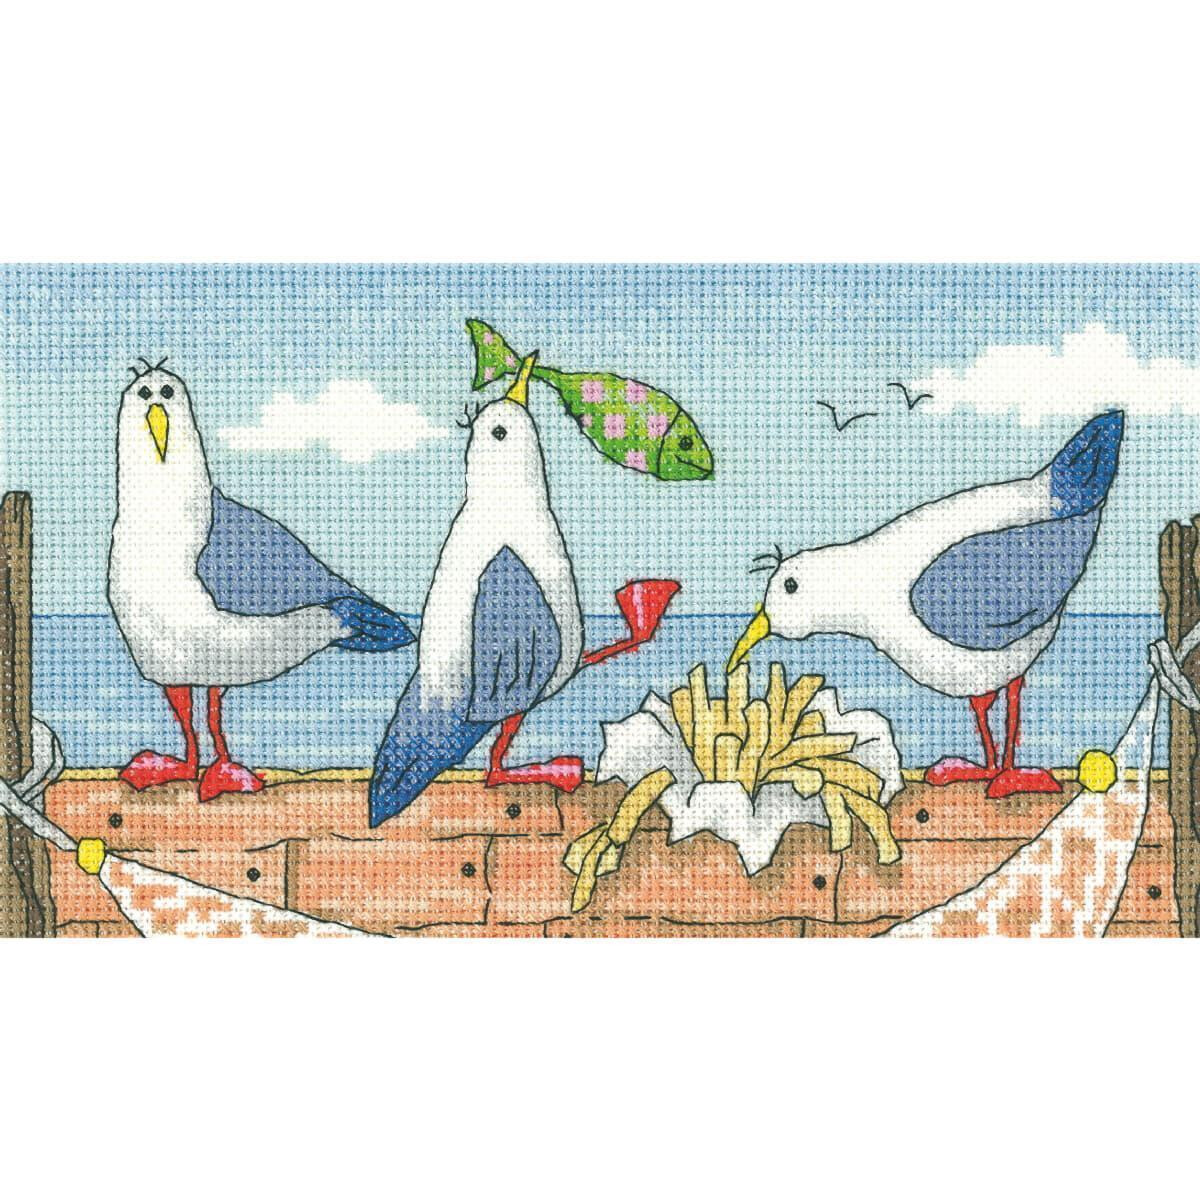 Heritage counted cross stitch kit Aida "Fish N Chips...